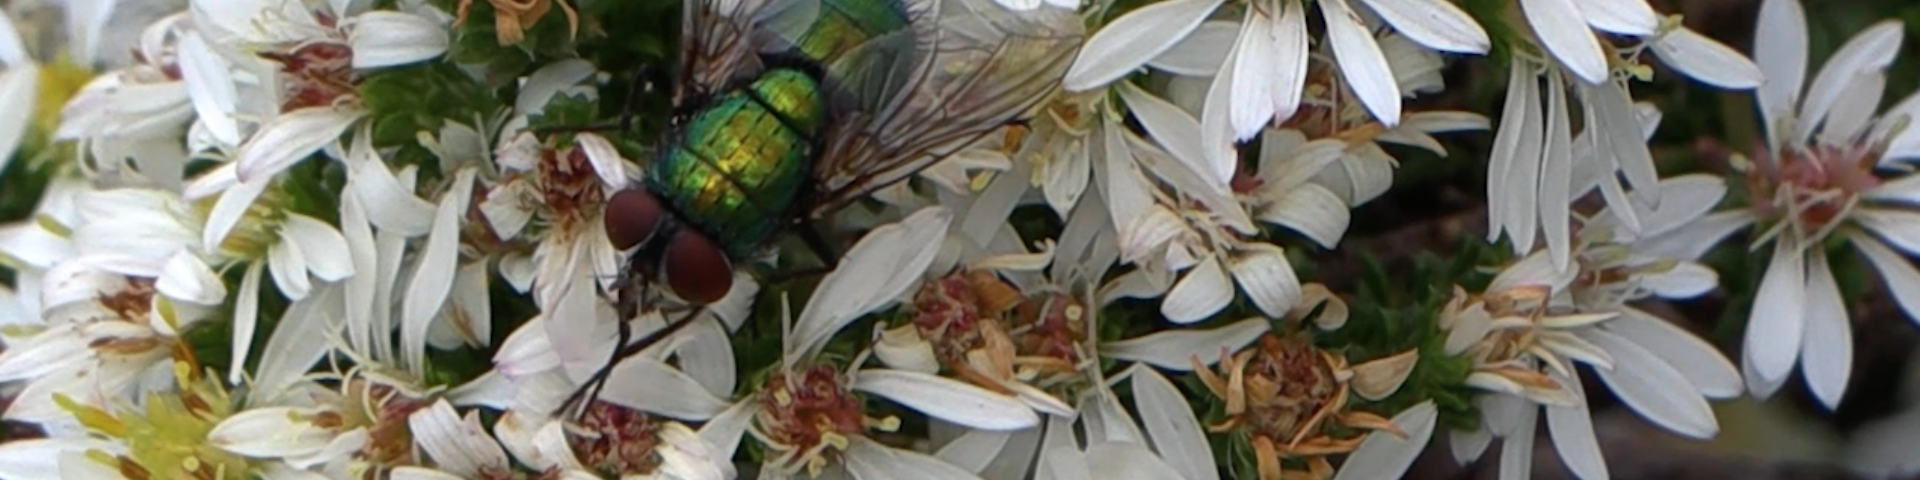 green fly pollinating white flowers